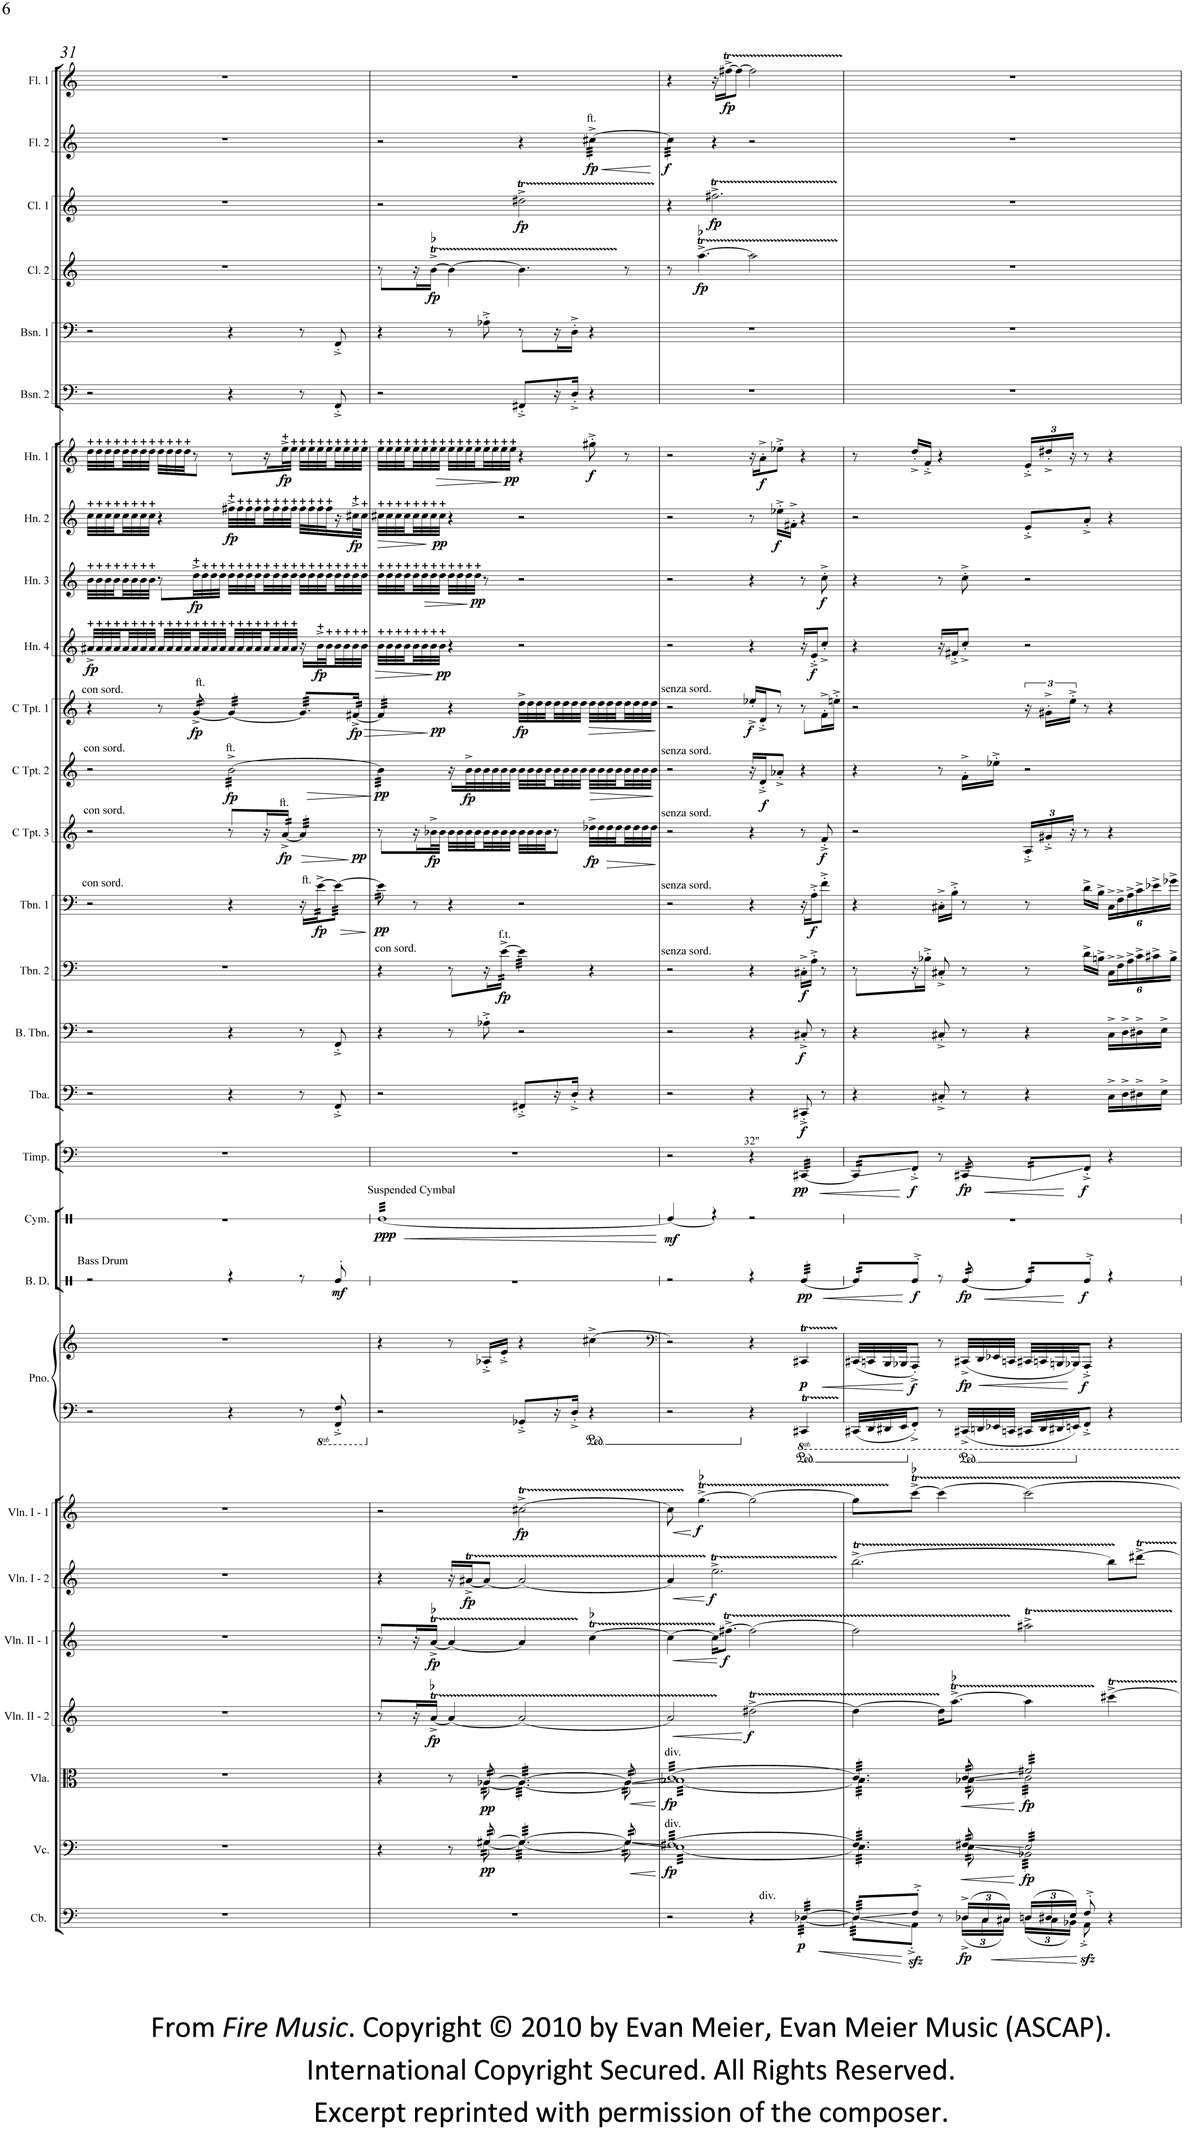 A page from the orchestral score of Evan Meier's Fire Music